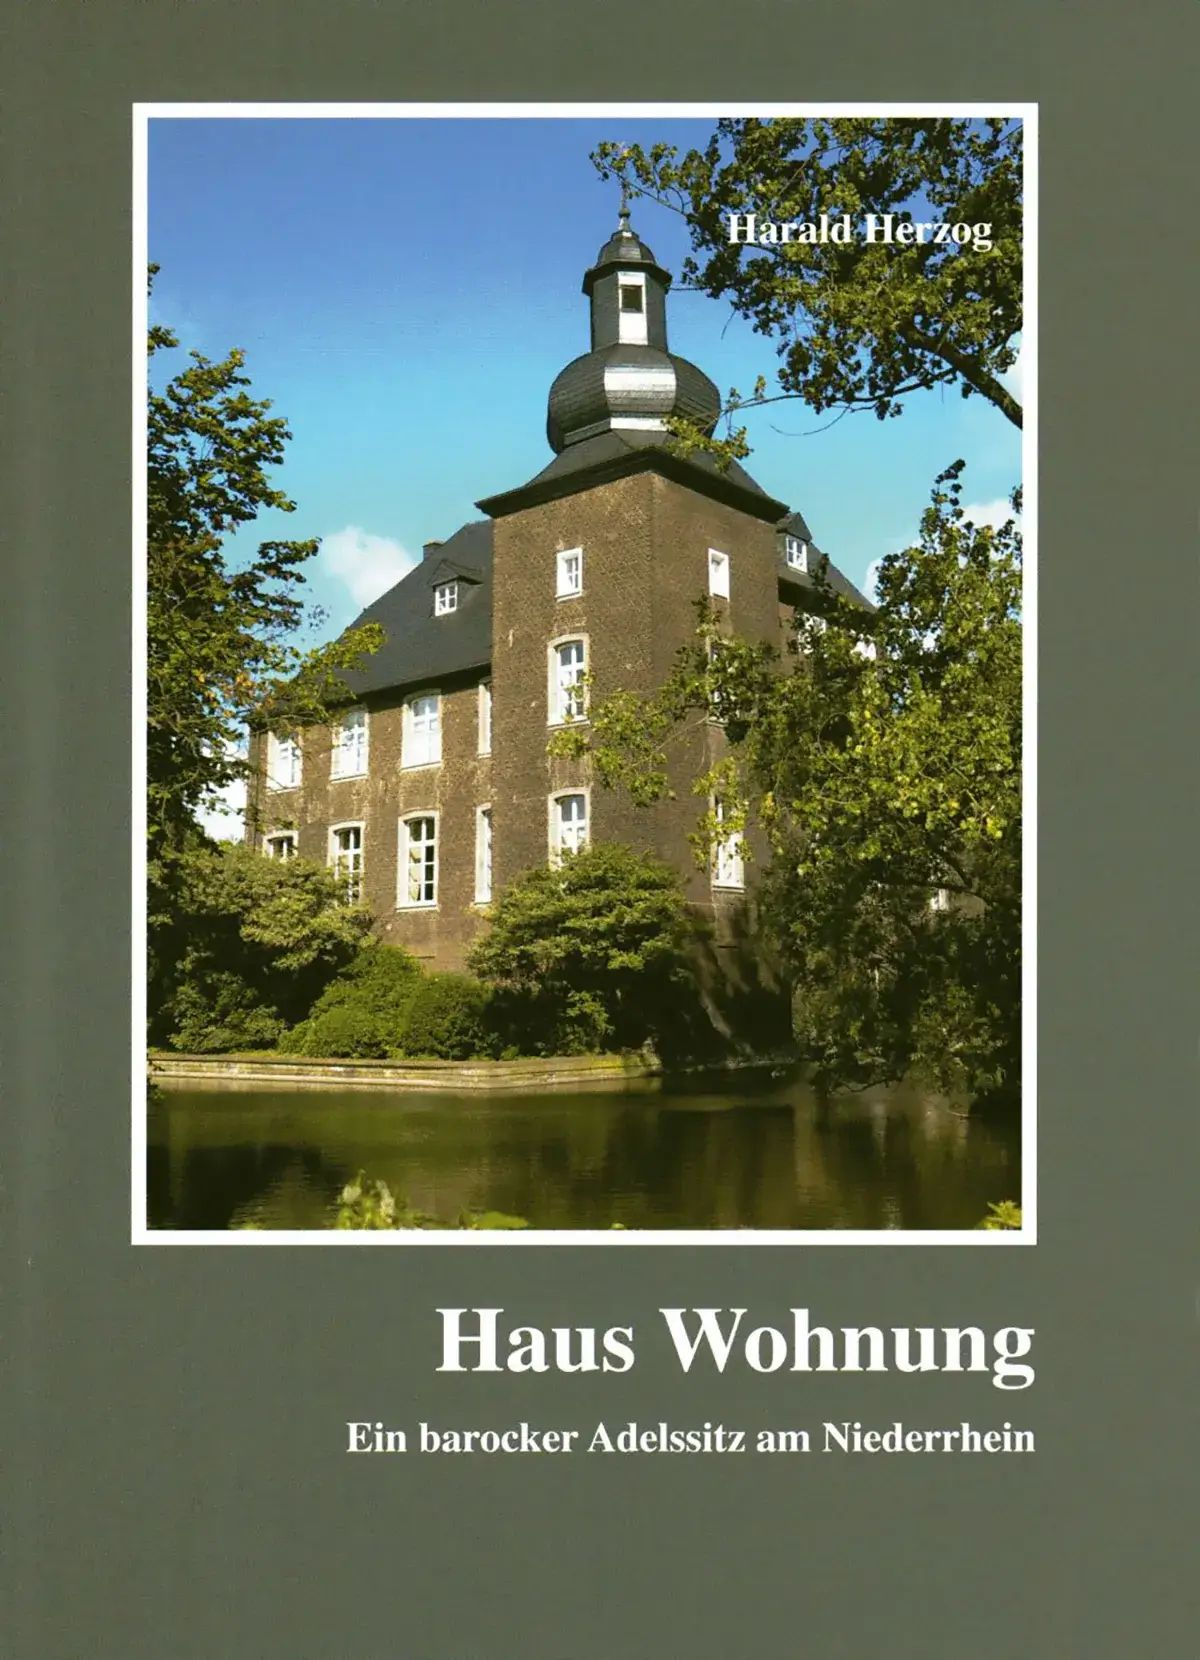 Cover - Haus Wohnung